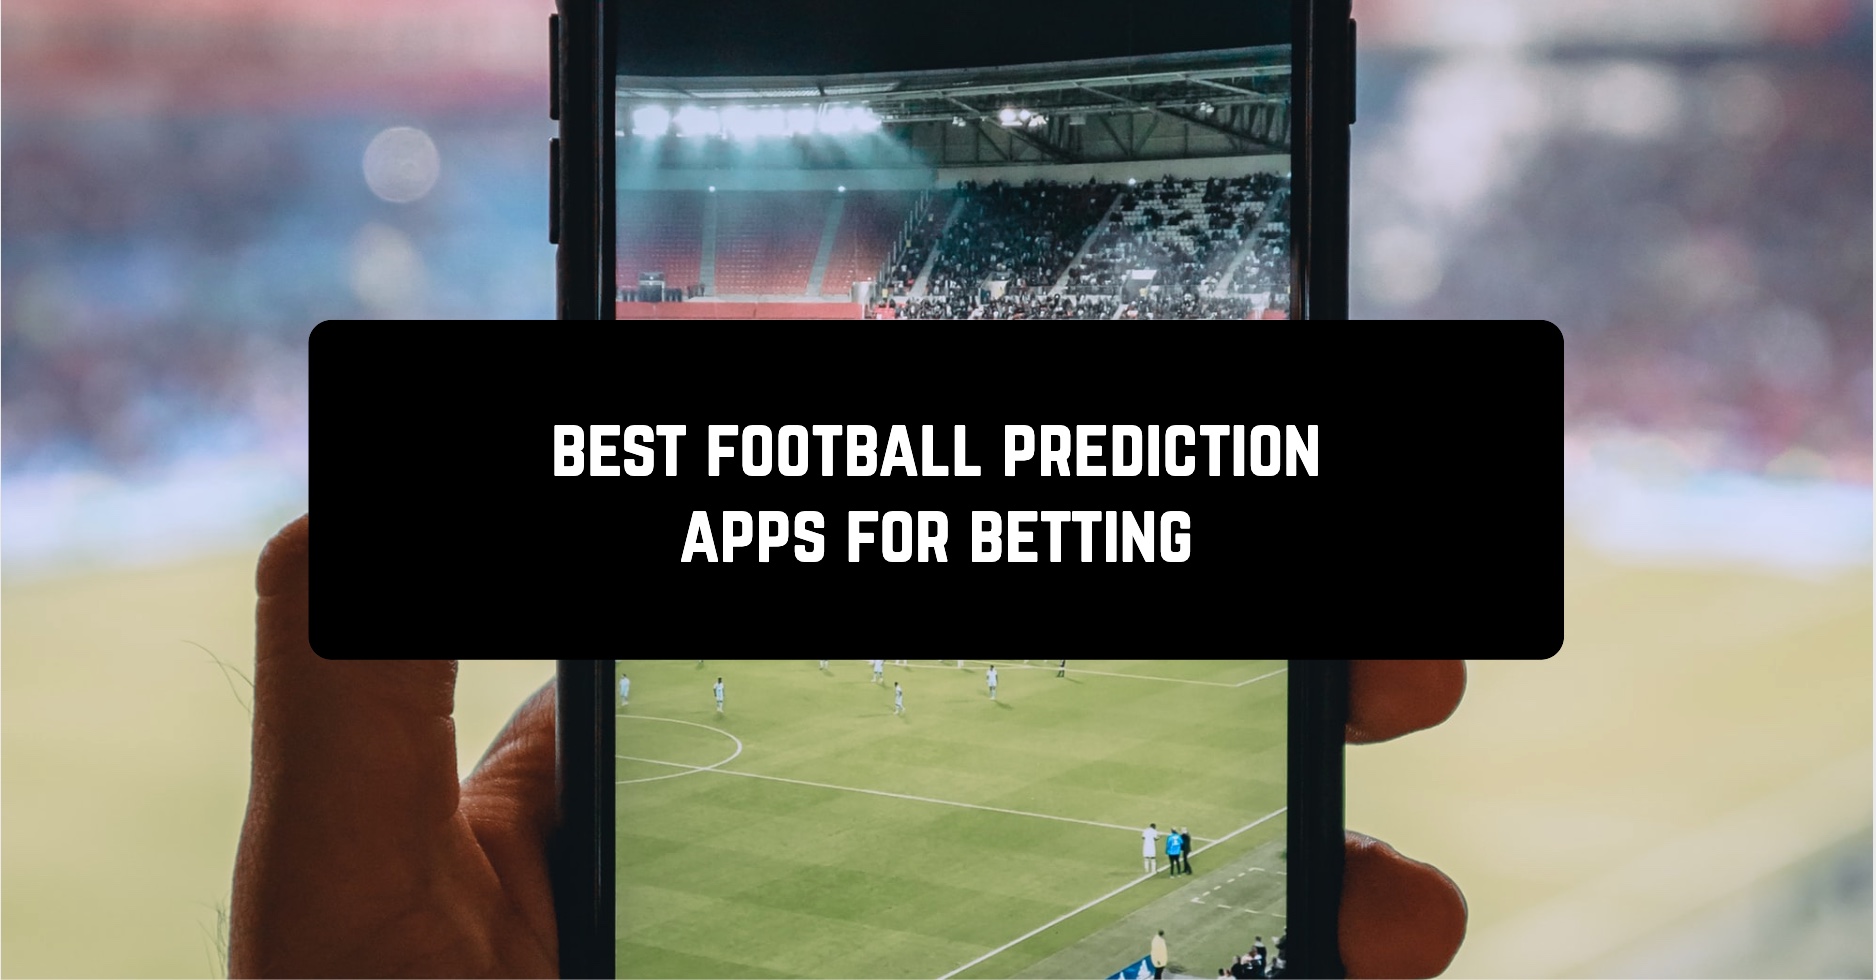 Best football prediction apps For betting